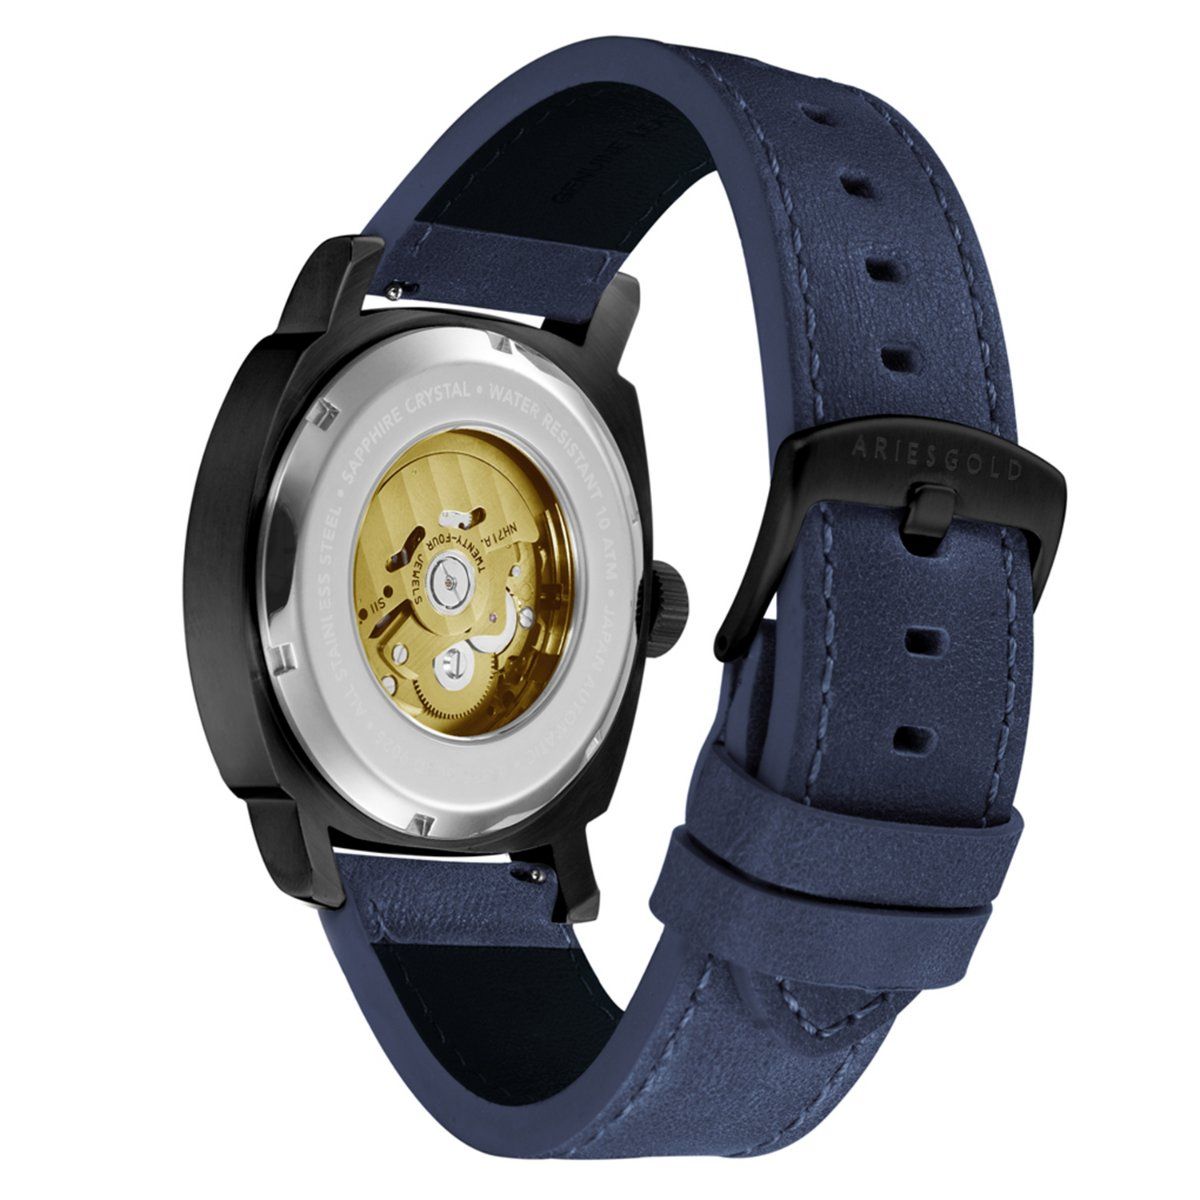 Buy Aries Gold Vanguard Automatic Skeleton Watch With Sapphire Glass For Men G 9025 Bk Bug Online 0400